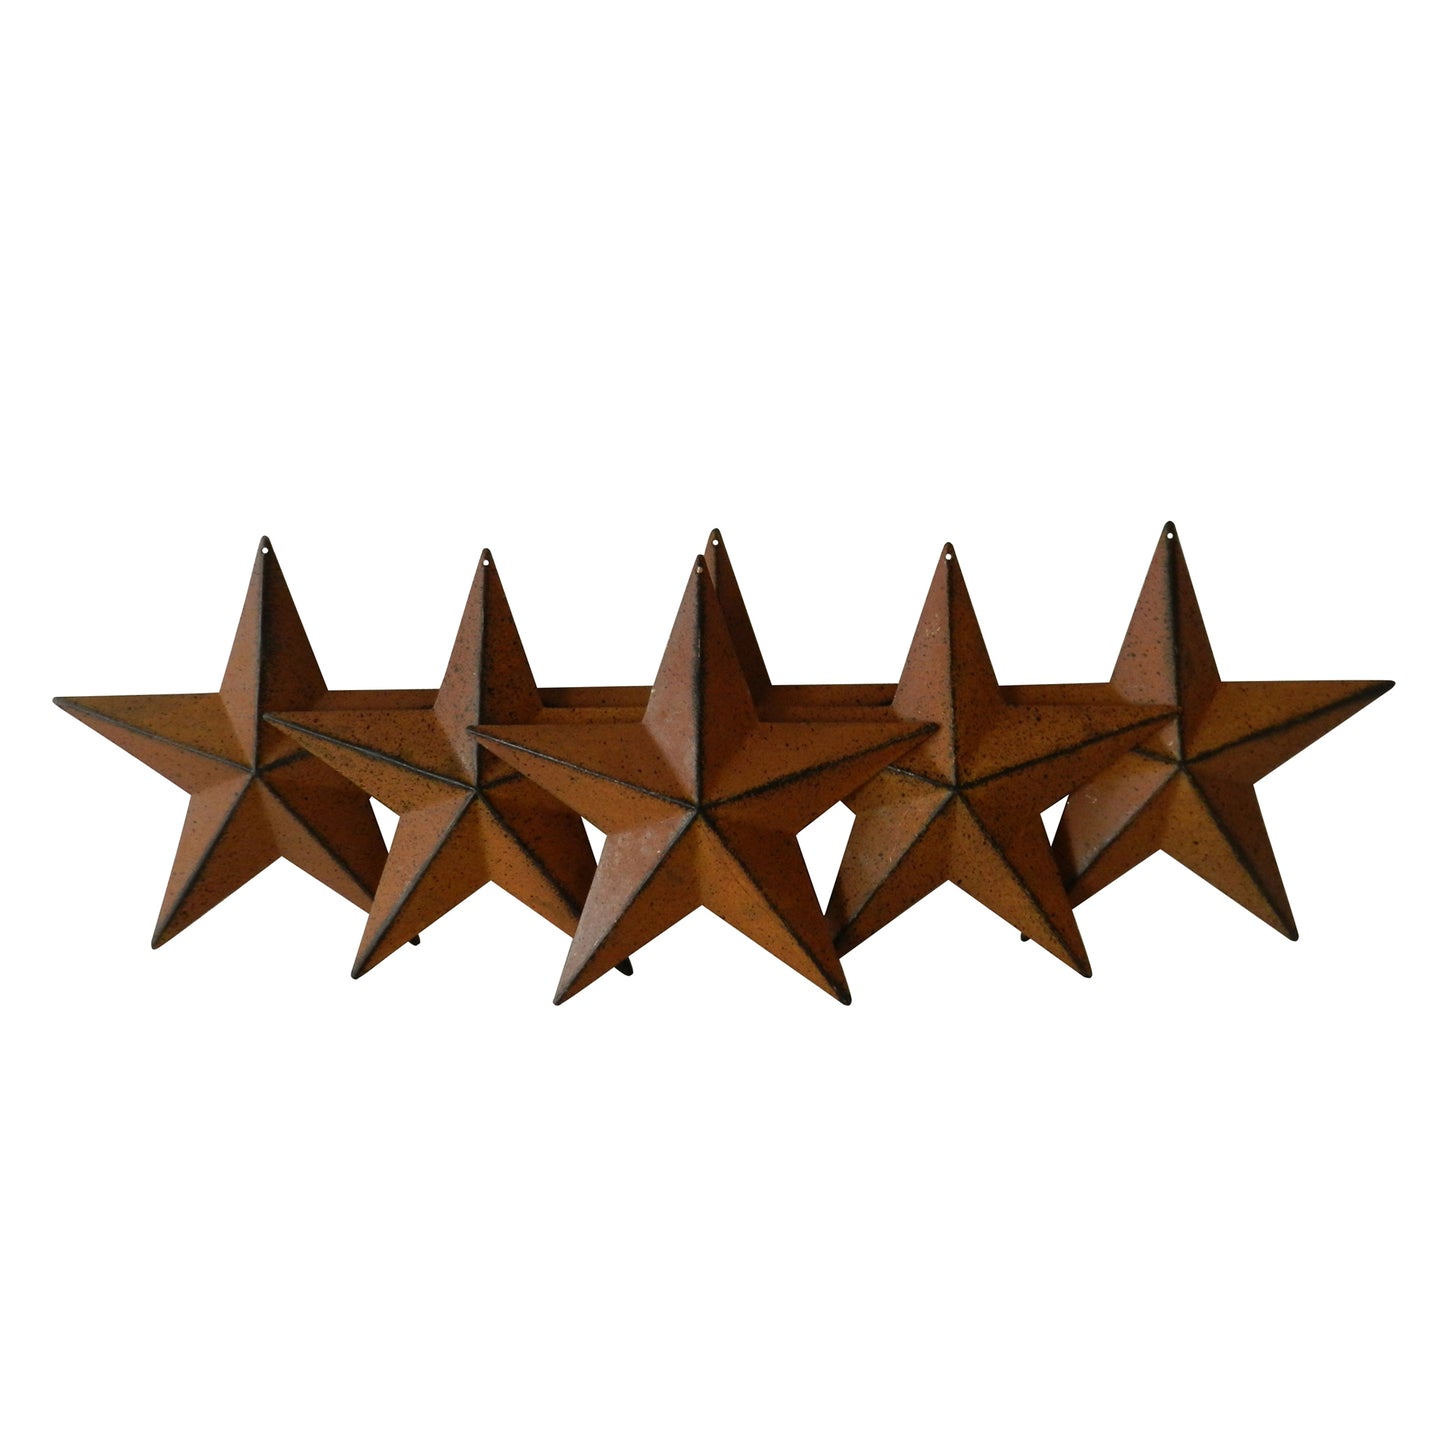 CVHOMEDECO. Country Rustic Antique Vintage Gifts Rusty/Black Metal Barn Star Wall/Door Decor, 5.5 Inch, Set of 6.